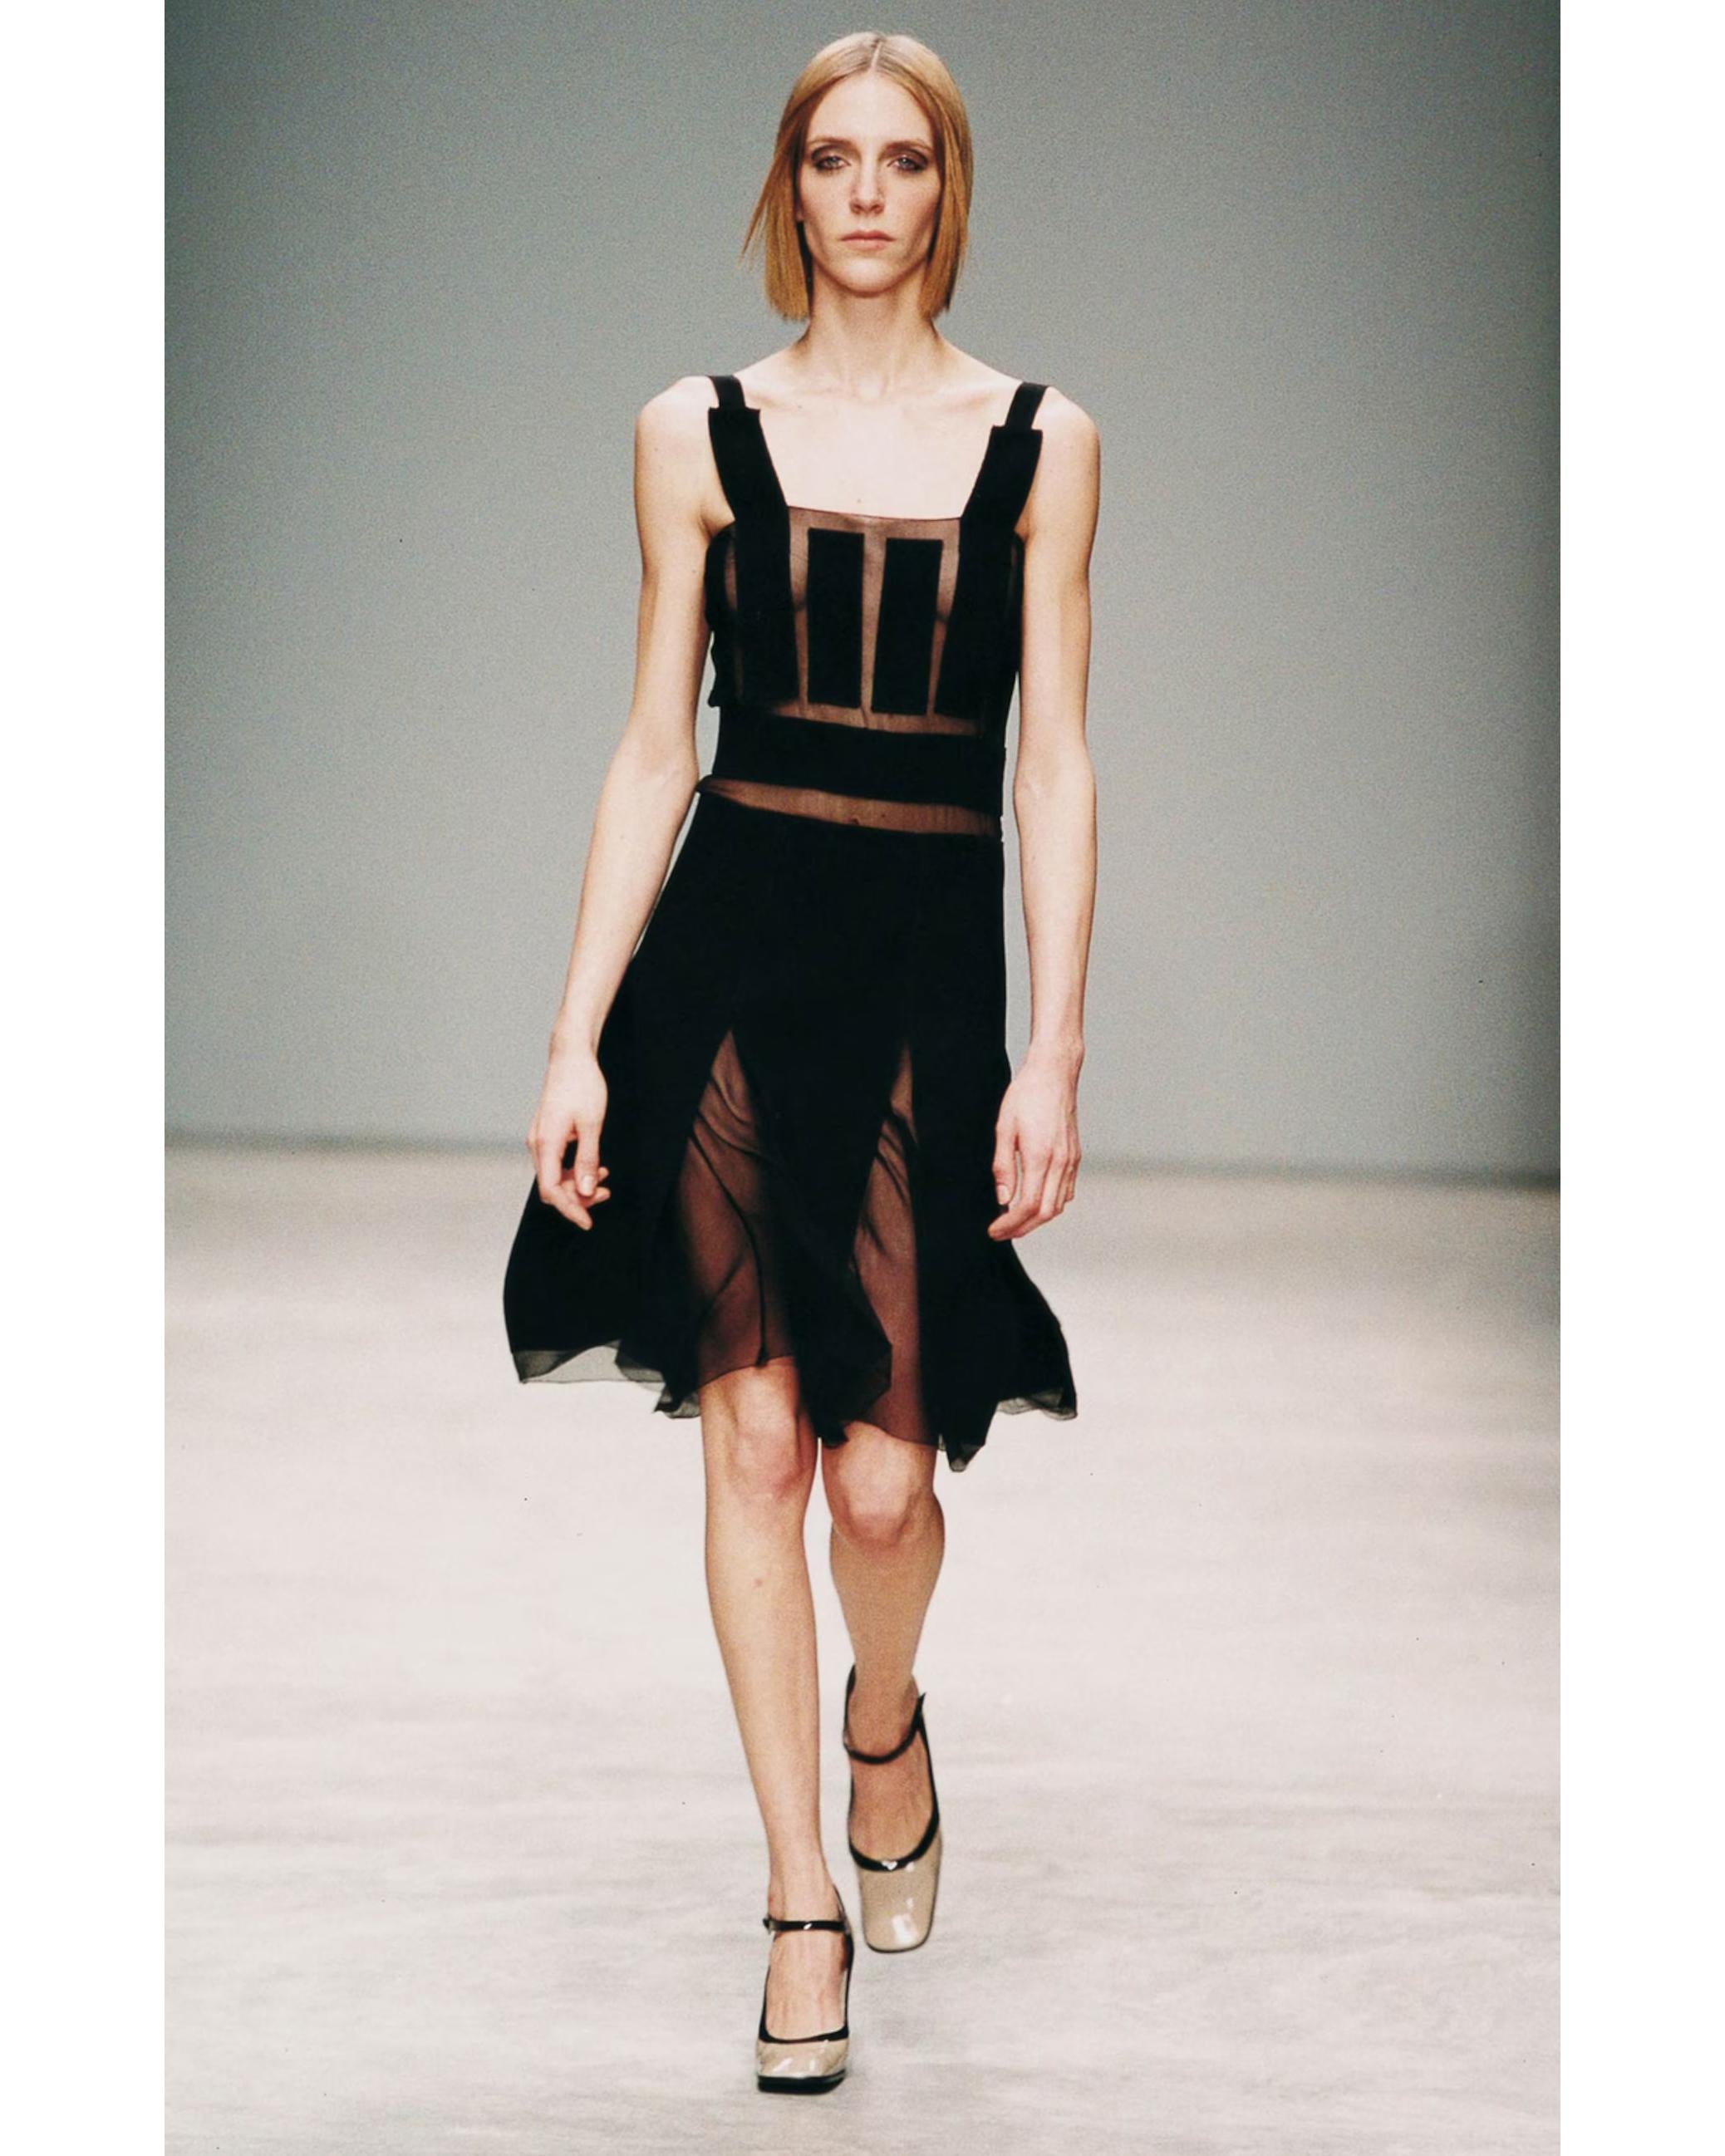 A/W 2001 Prada by Miuccia Prada knee length black dress with semi-sheer silk chiffon accents. Delicate silk chiffon paneling is alternated with soft virgin wool to create a sexy yet chic fit. Square neckline, sleeveless dress with A-line skirt. As